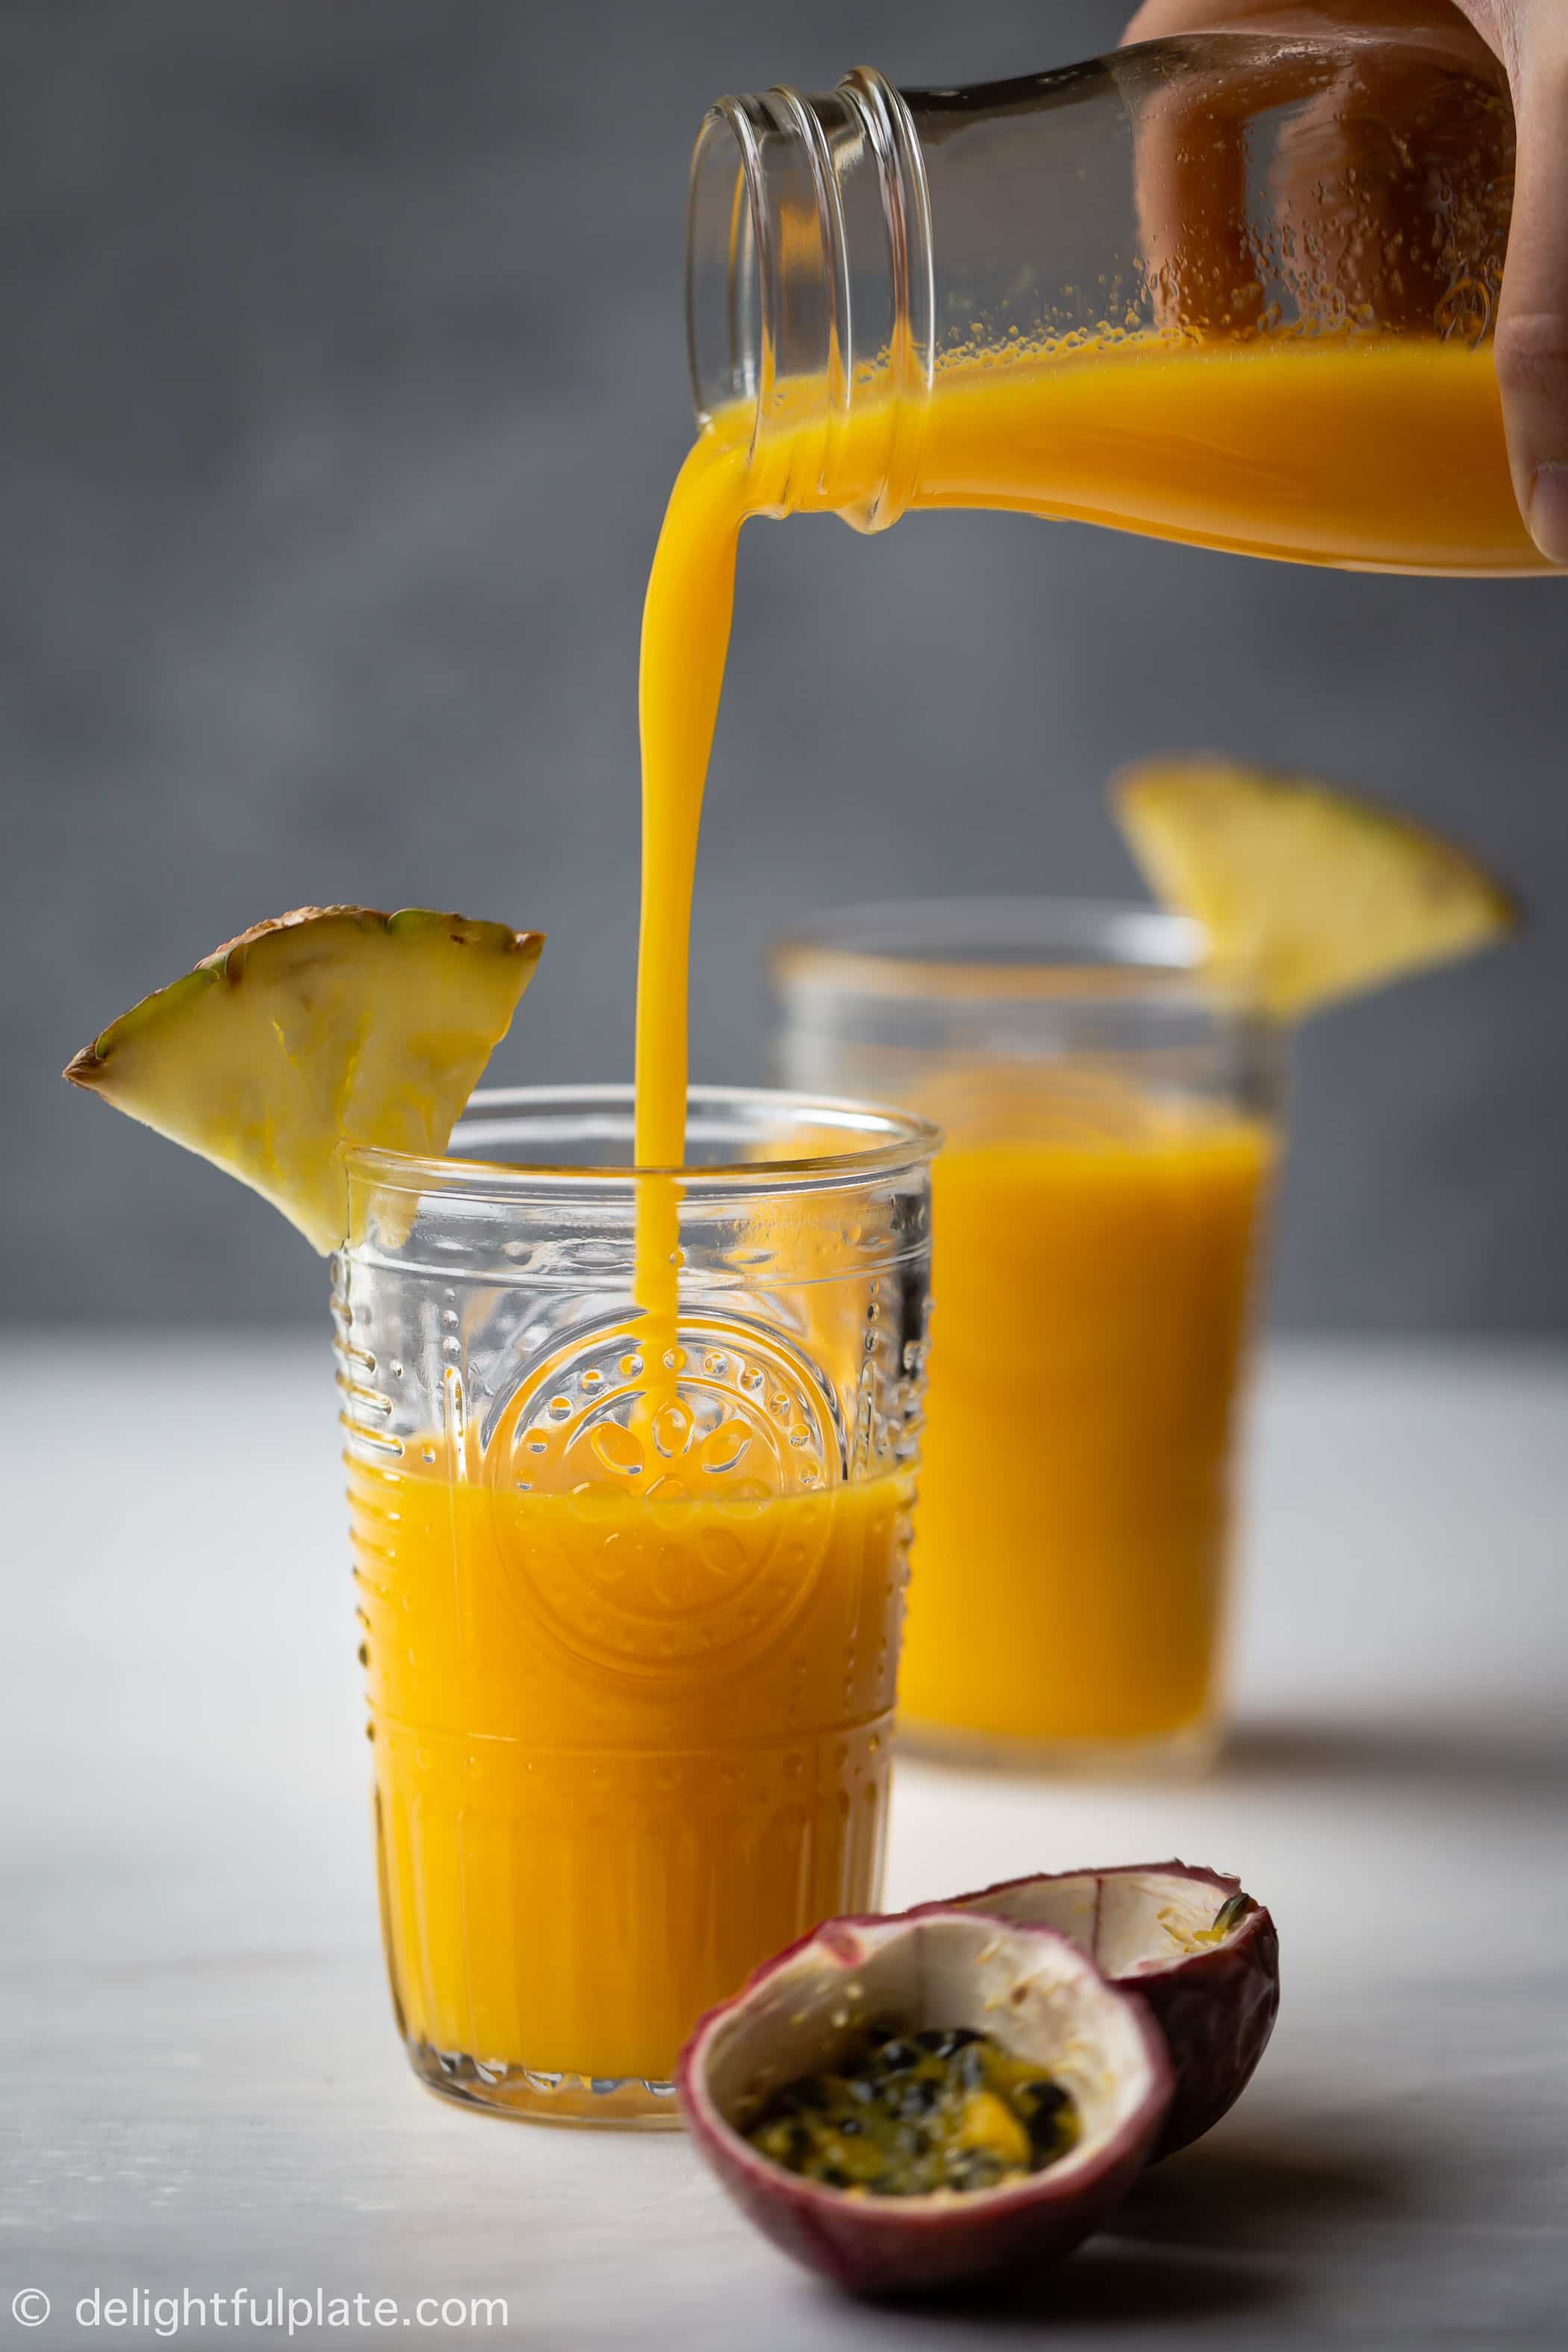 This Tropical Pineapple Mango Smoothie is a tasty and healthy drink with a pleasant sweet fruity scent. Made with fresh mango, pineapple, passion fruit and coconut juice, it is dairy-free with no added sugar.